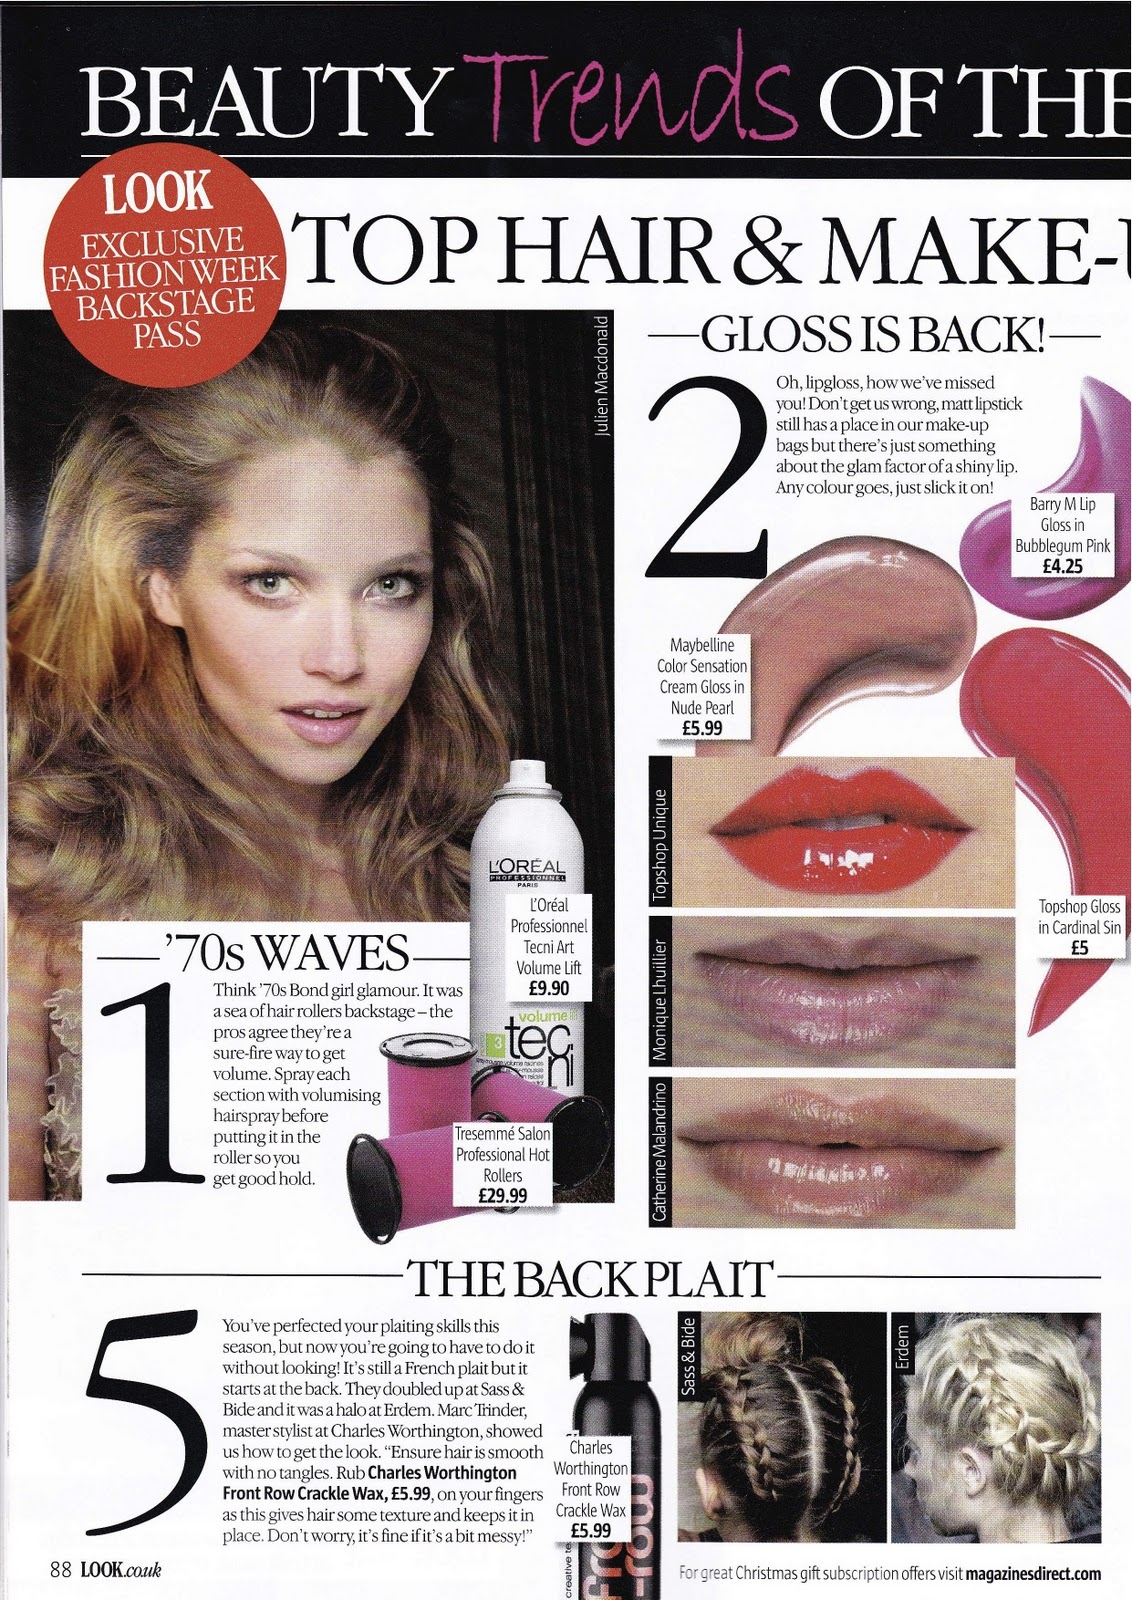 All The Beauty Pages: Look Magazine October 11: Beauty Trends of The Week